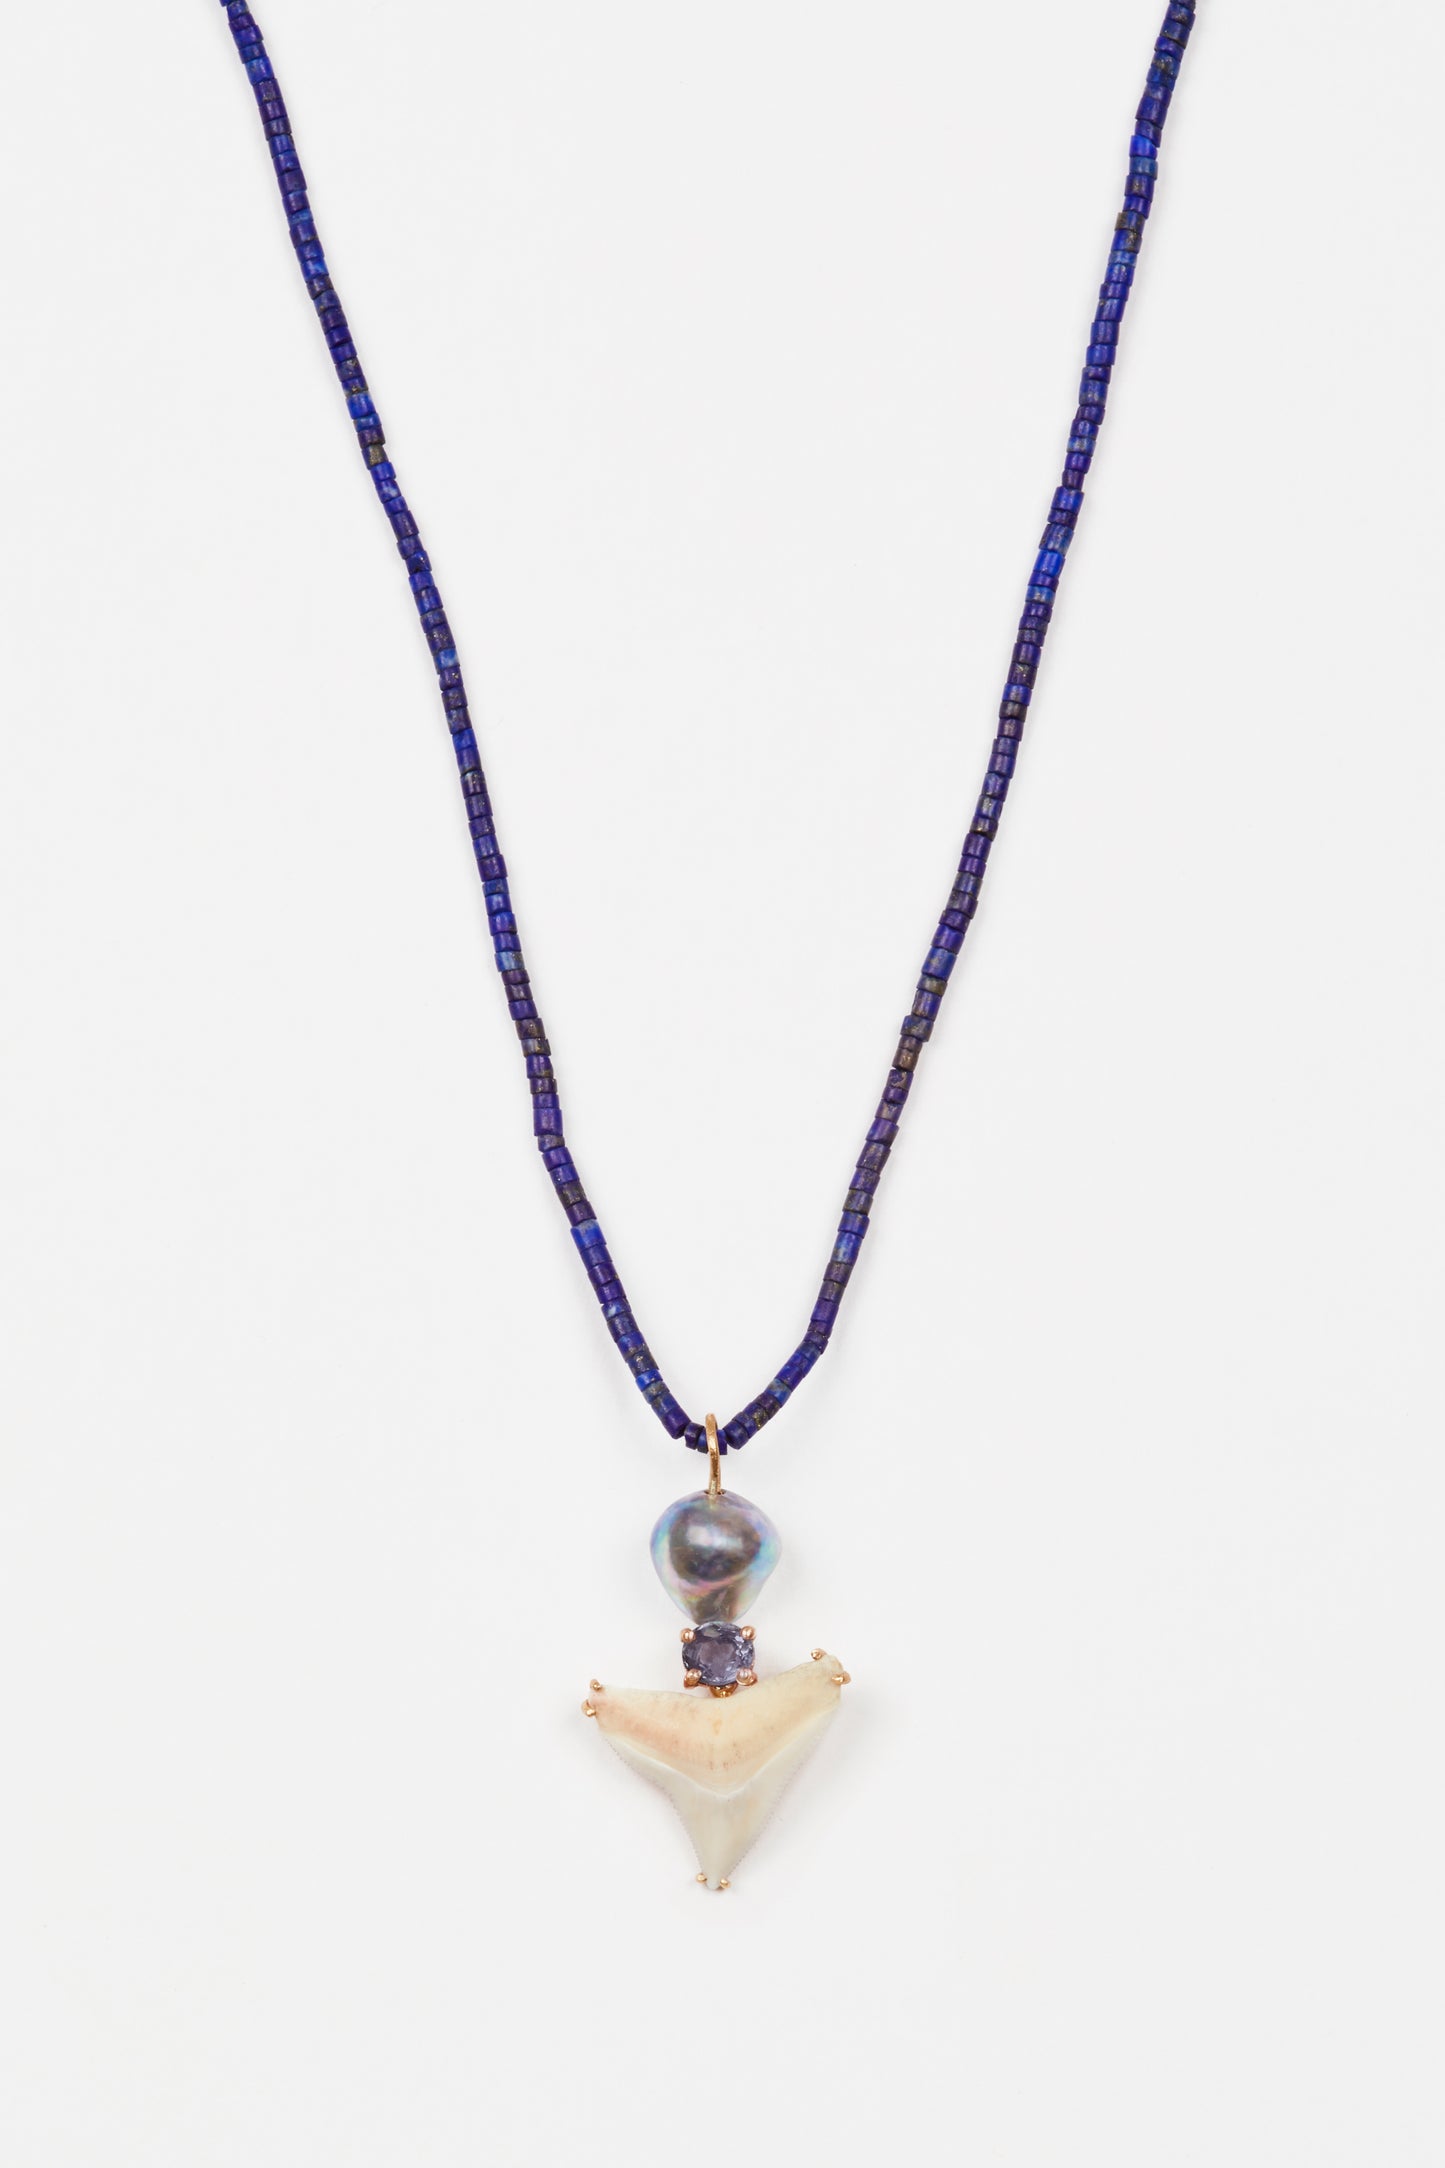 Lapis Beads with Shark Tooth, Spinel and Pearl